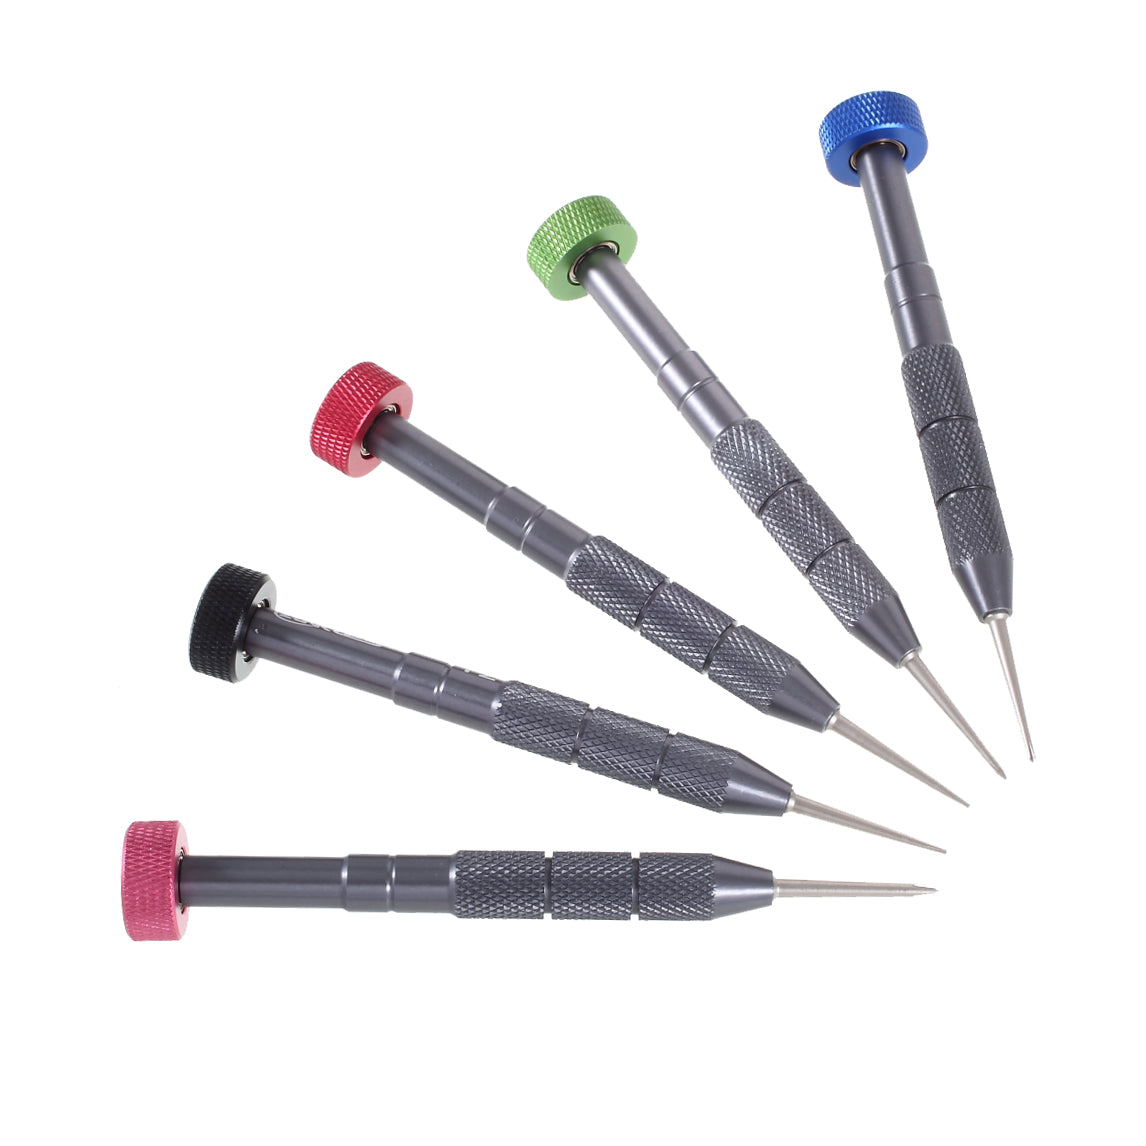 ANKLES Pro12 5Pcs/Set High Precision Screwdriver for iPhone Android Disassemble Opening Tool